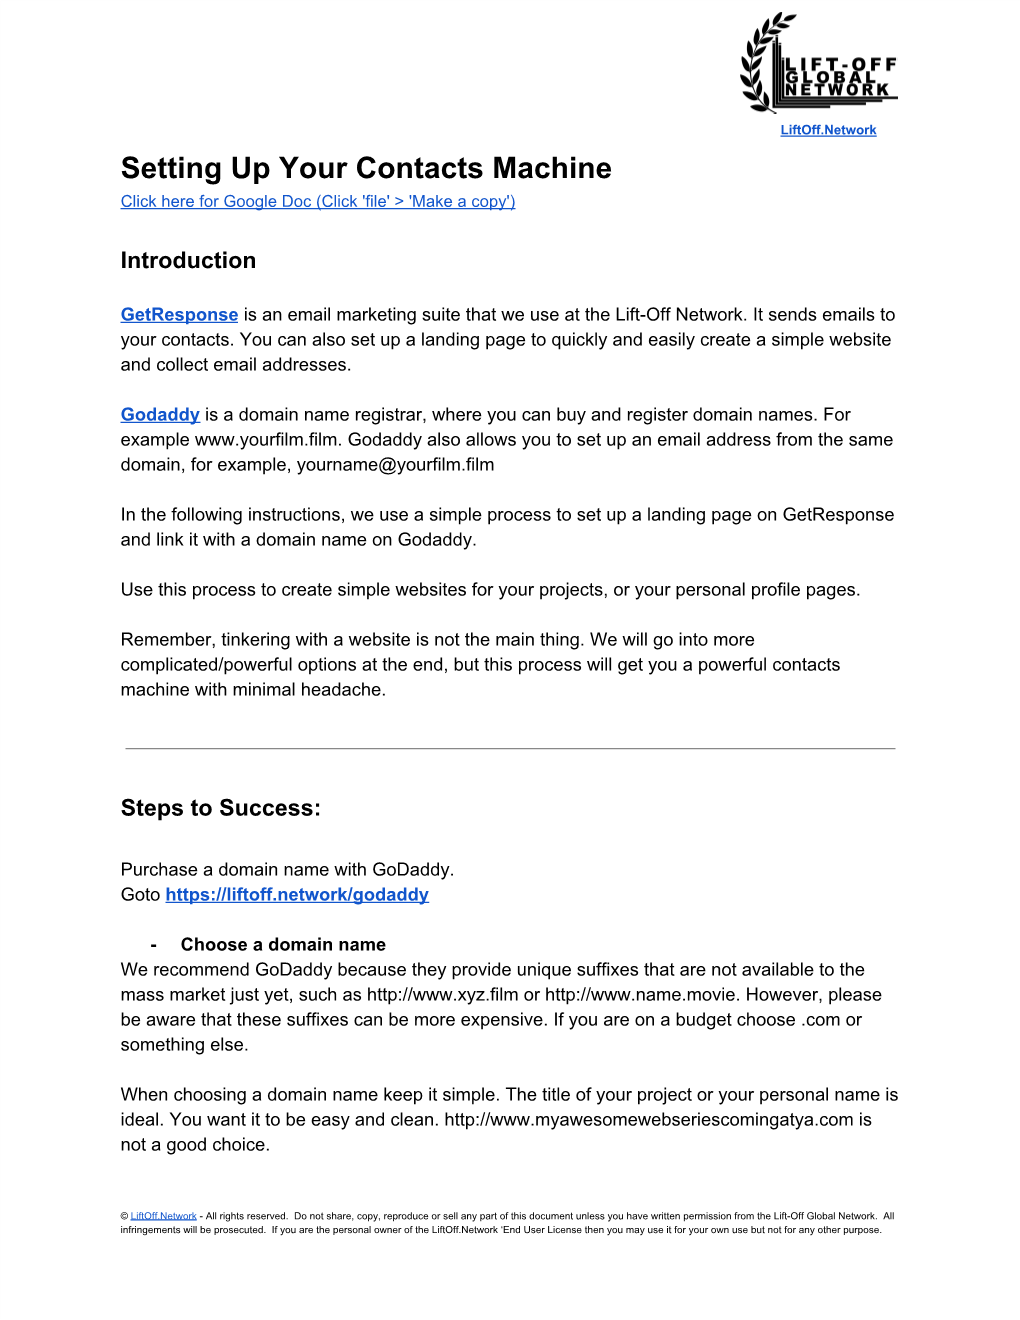 Setting up Your Contacts Machine Click Here for Google Doc (Click 'File' > 'Make a Copy')